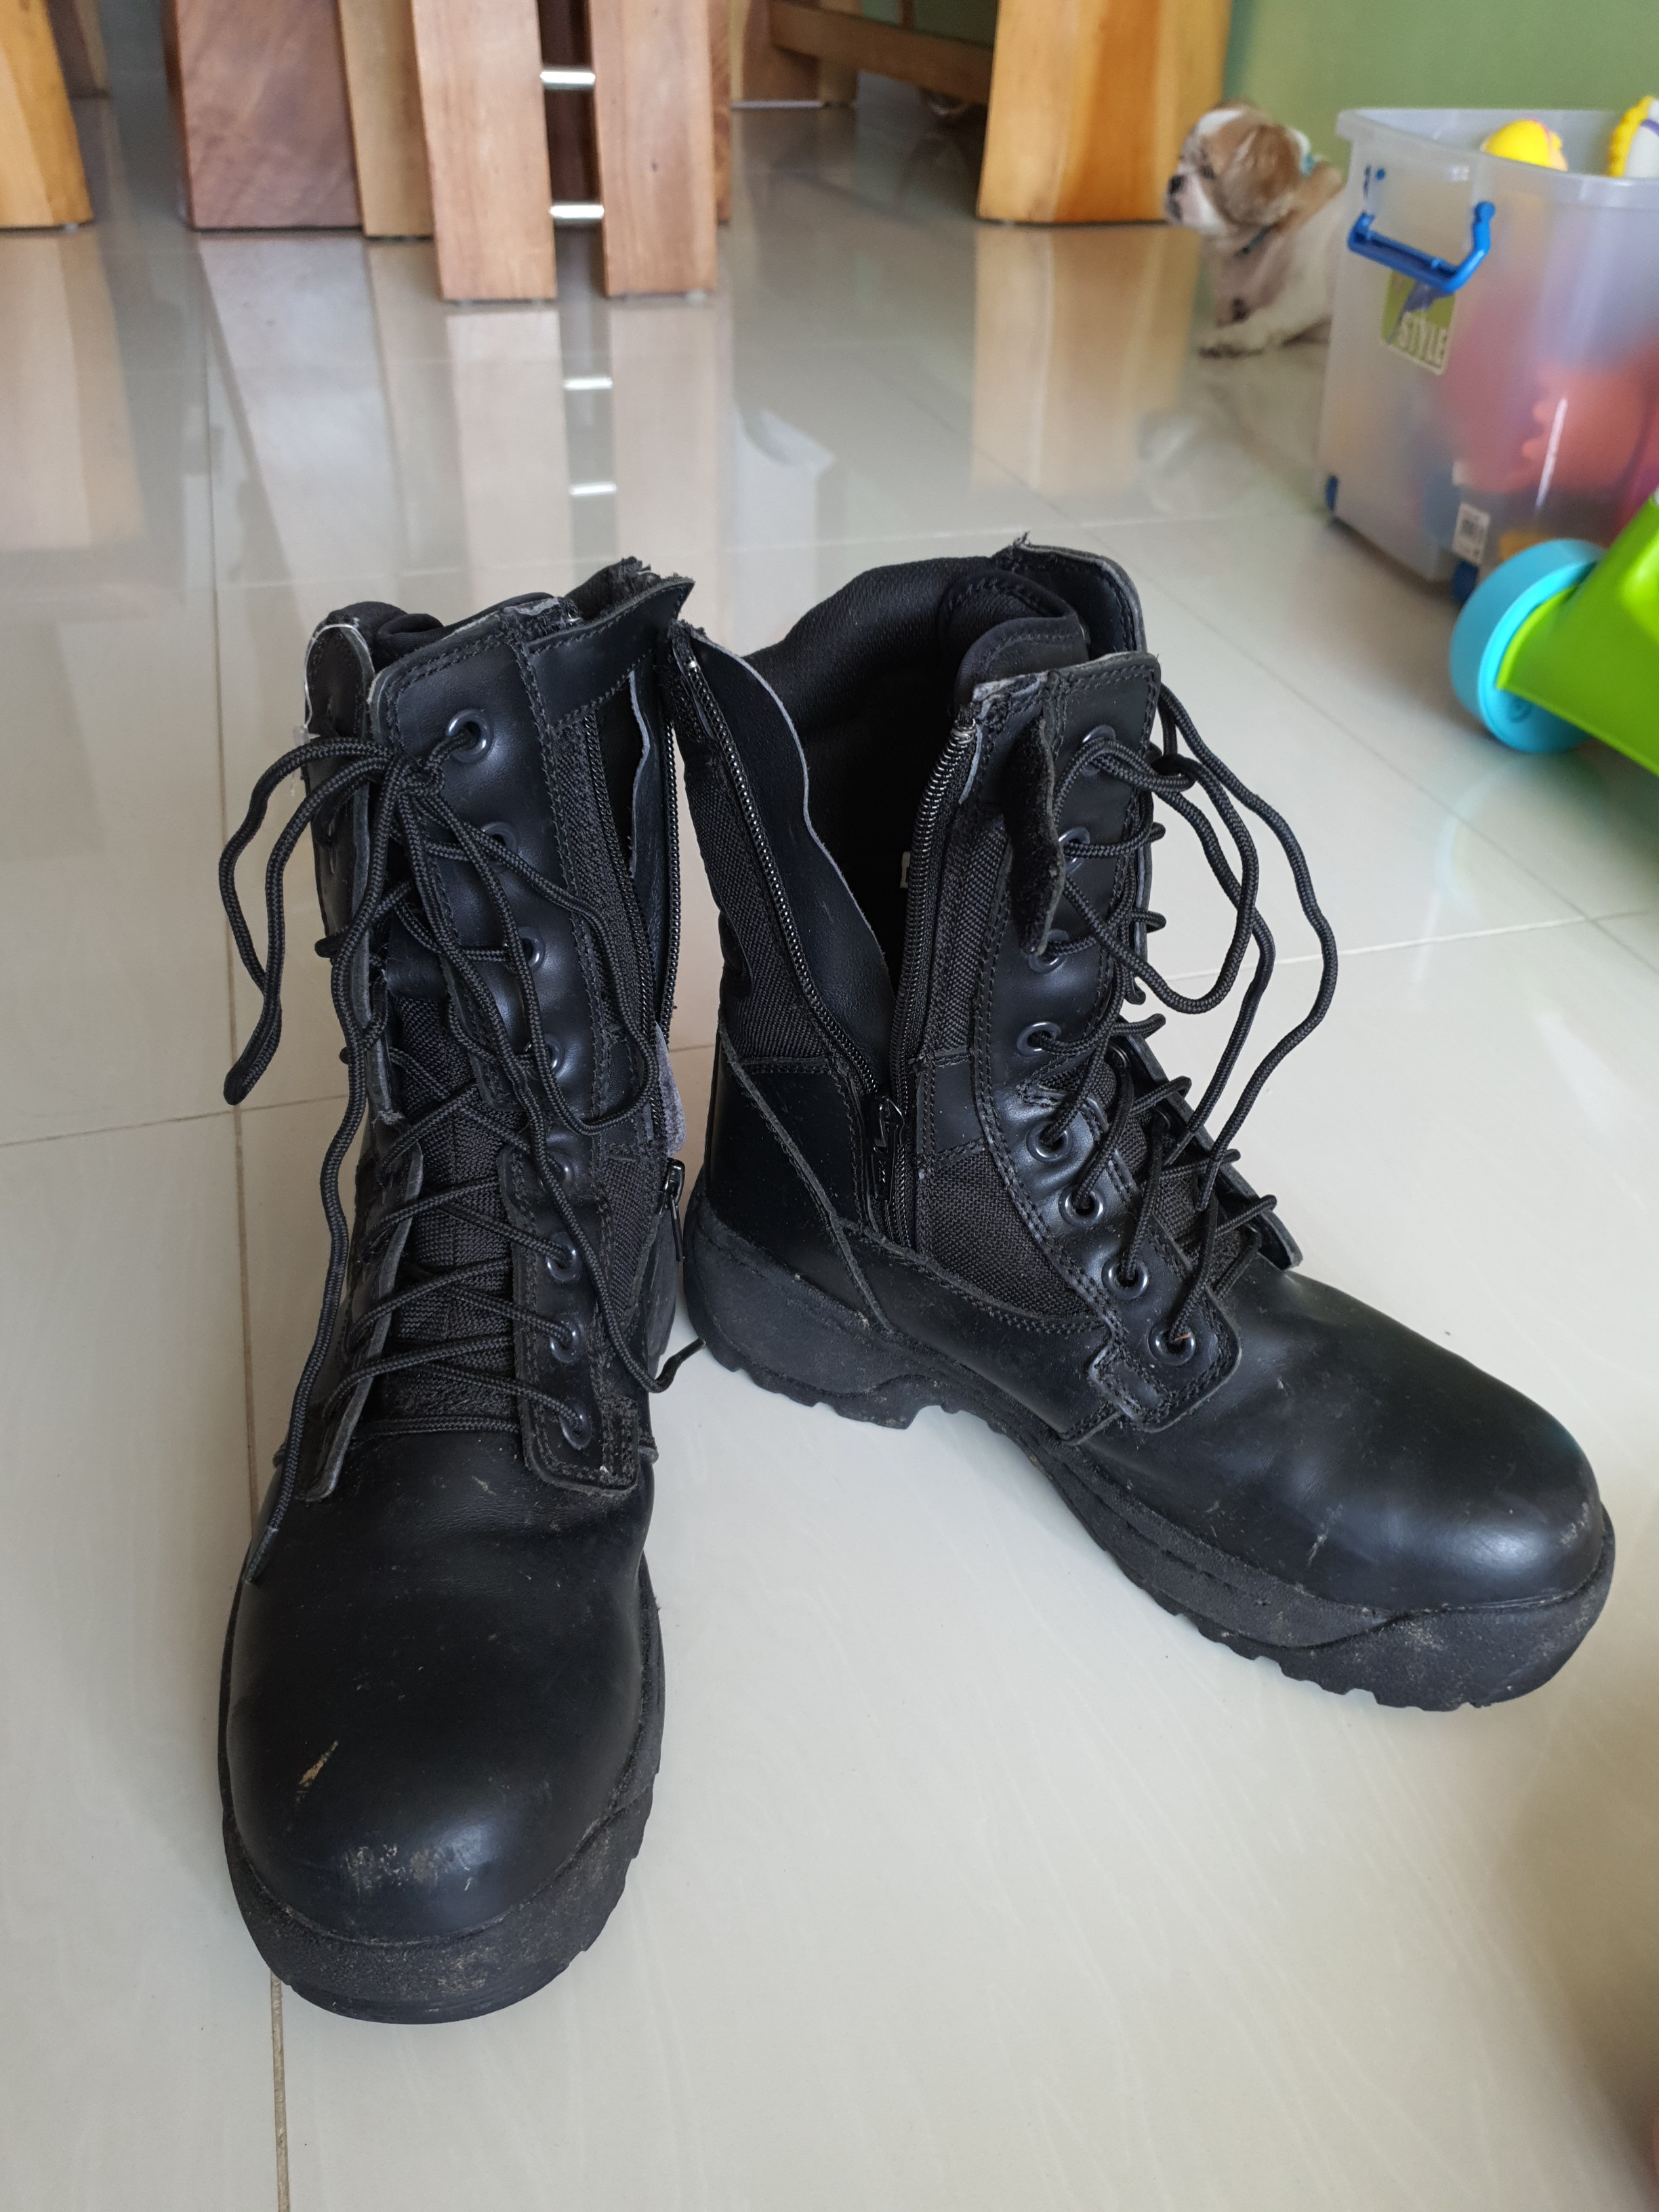 SAF zip boots. US 7.5, Men's Fashion, Footwear, Boots on Carousell